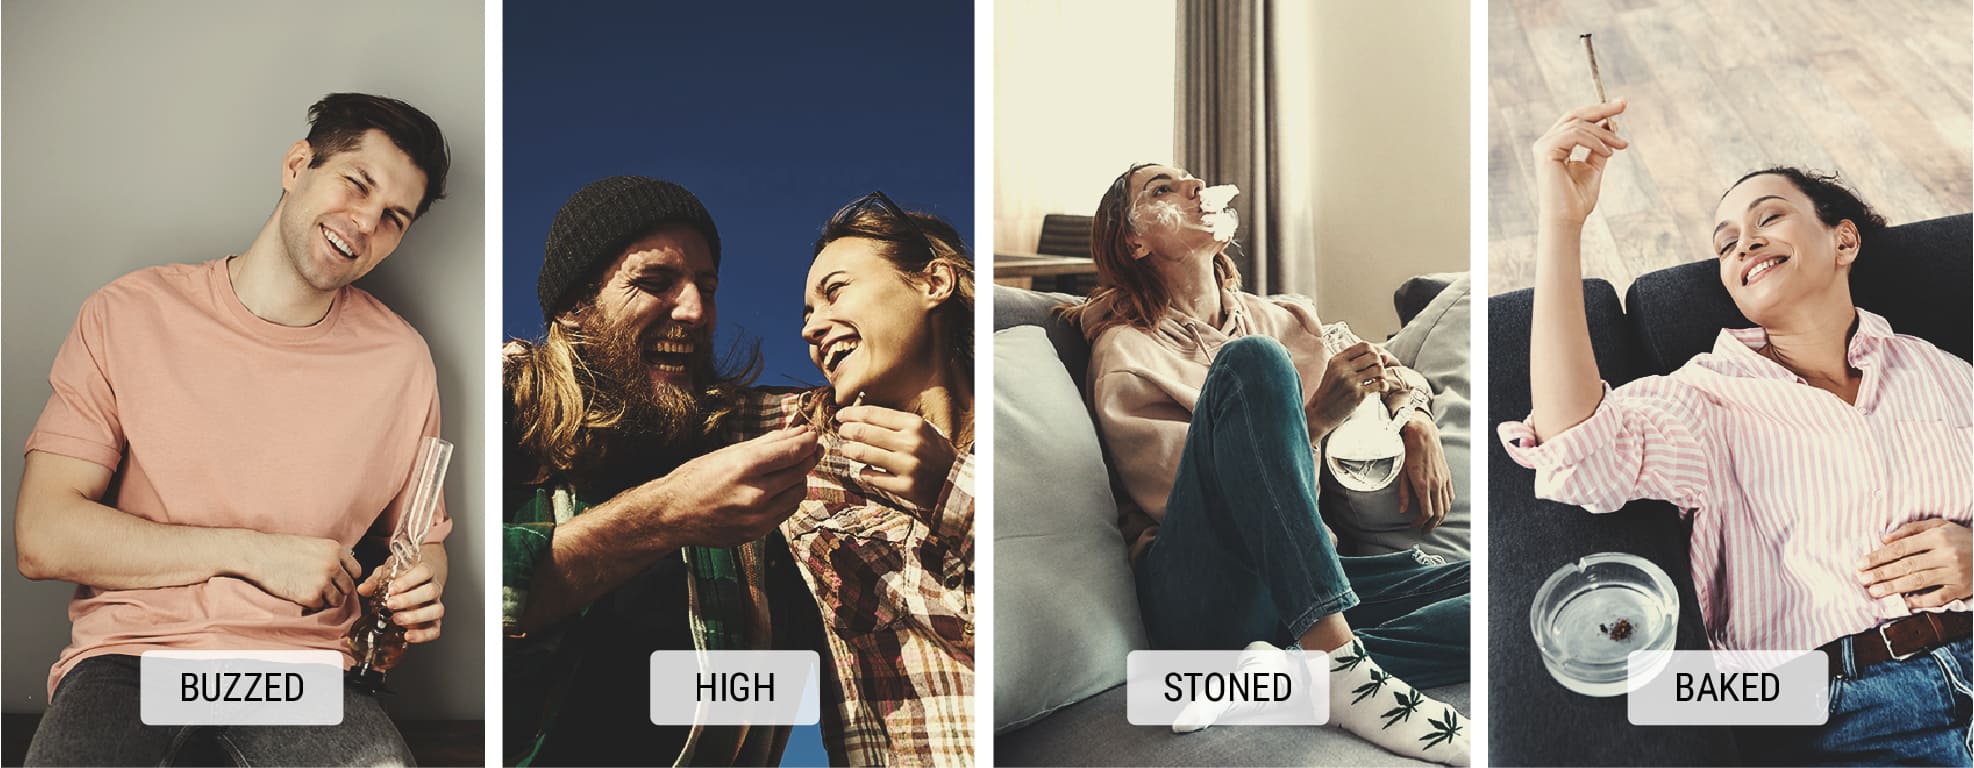 What Does It Mean To Be Stoned?